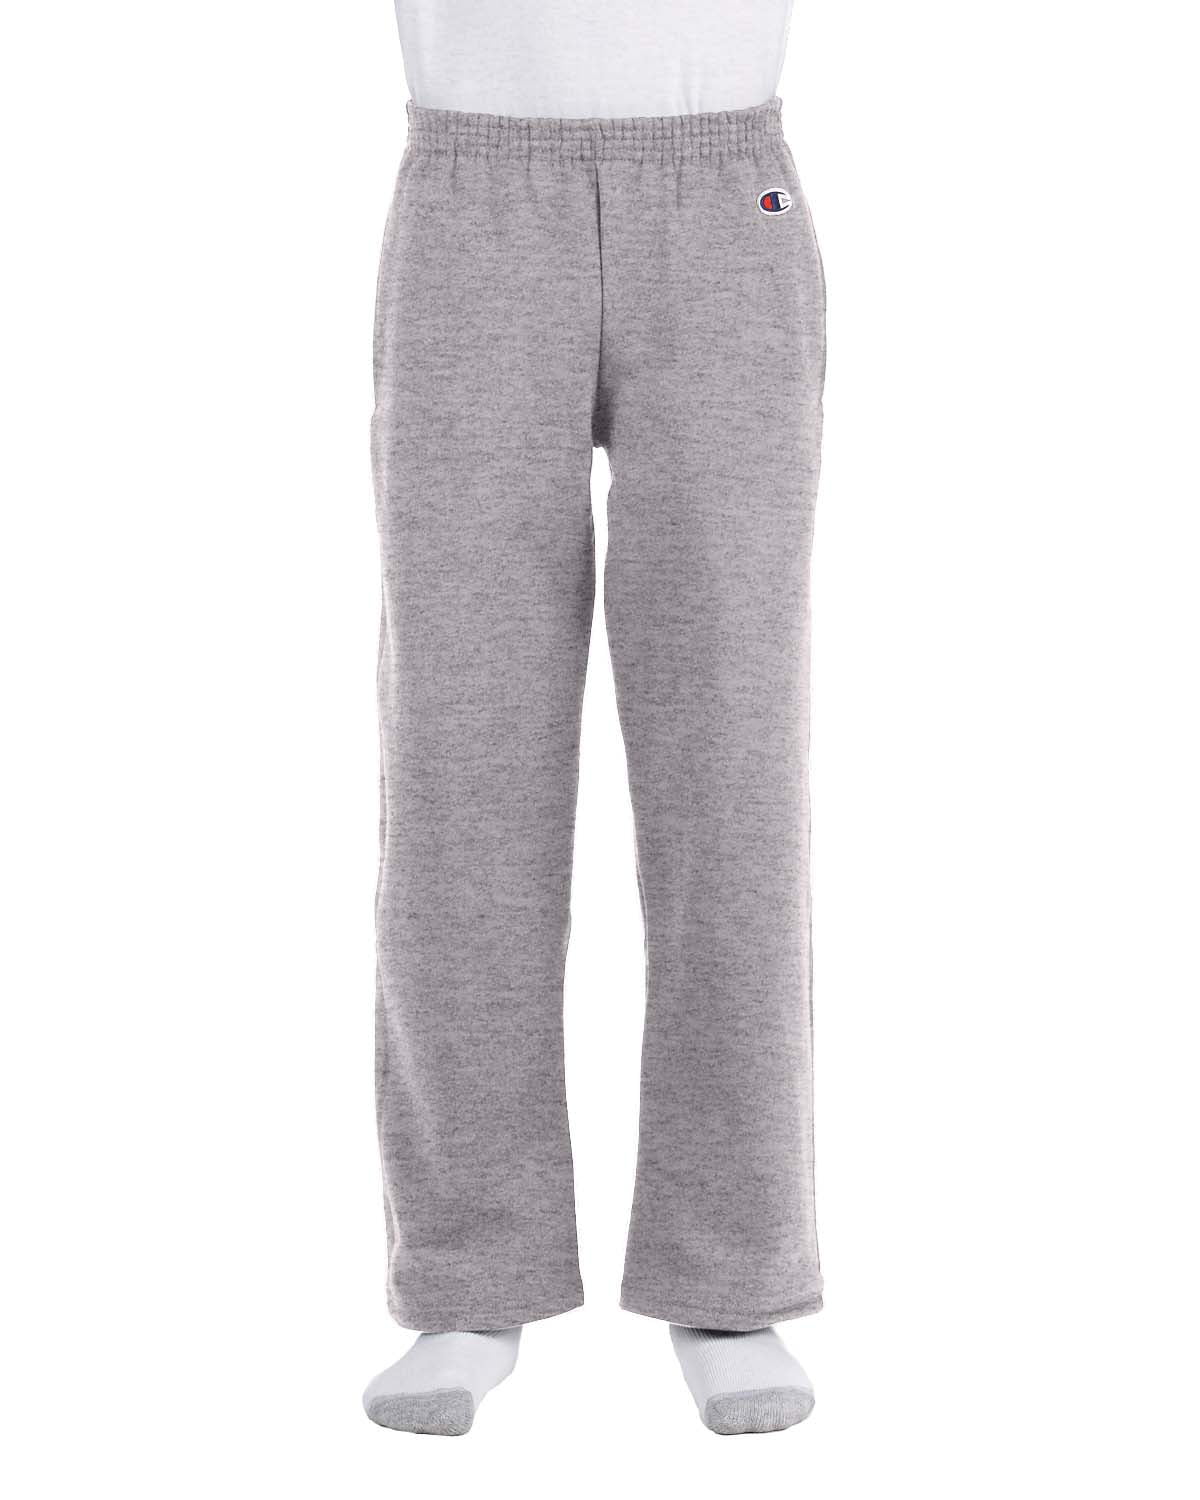 P890 Double Dry Eco Youth Open Bottom Sweatpants with Pockets 